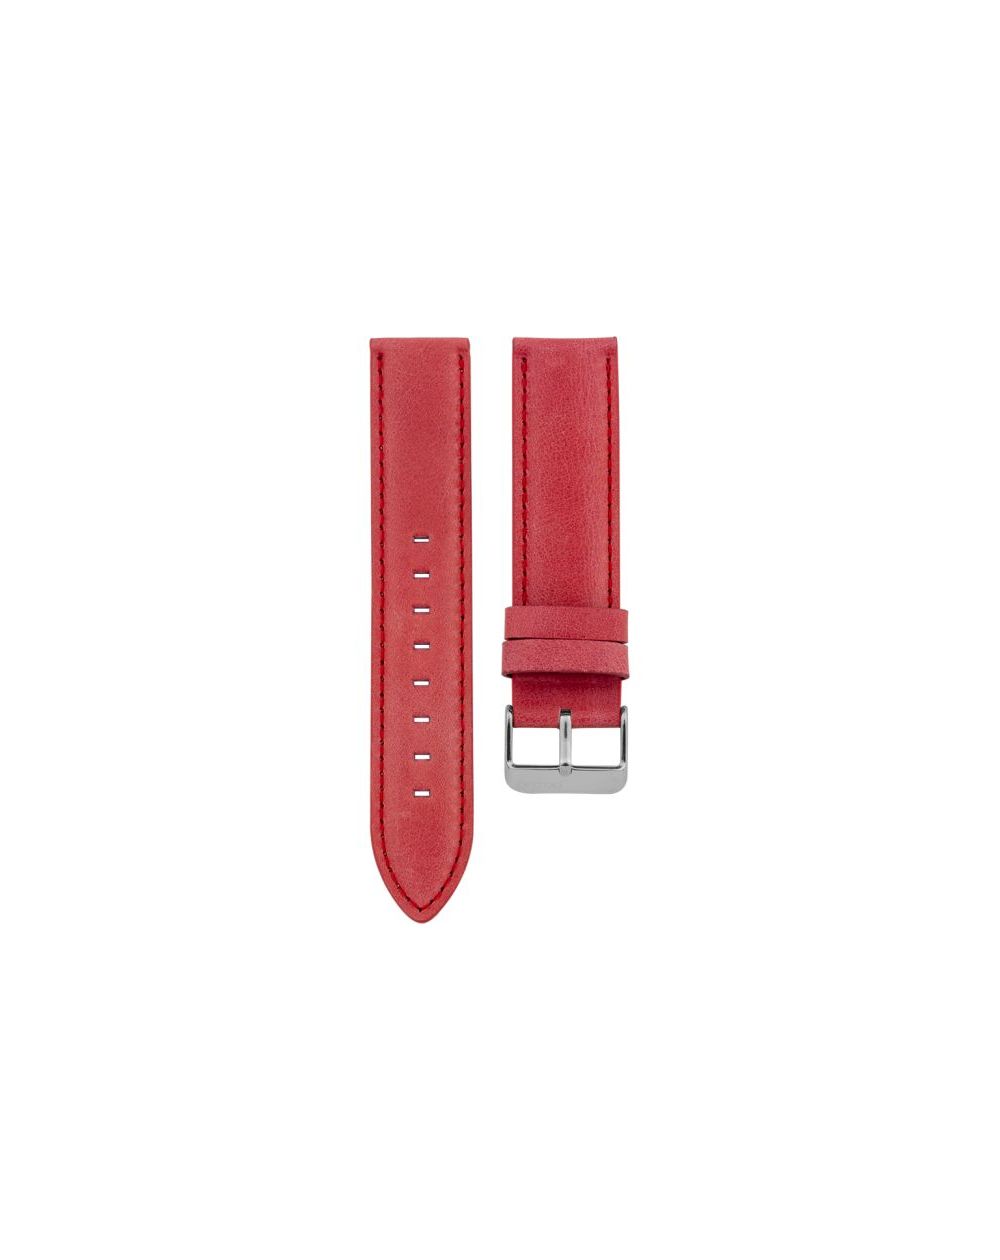 91.20 - coral red 20 mm. - Bracelet pour montre Oozoo